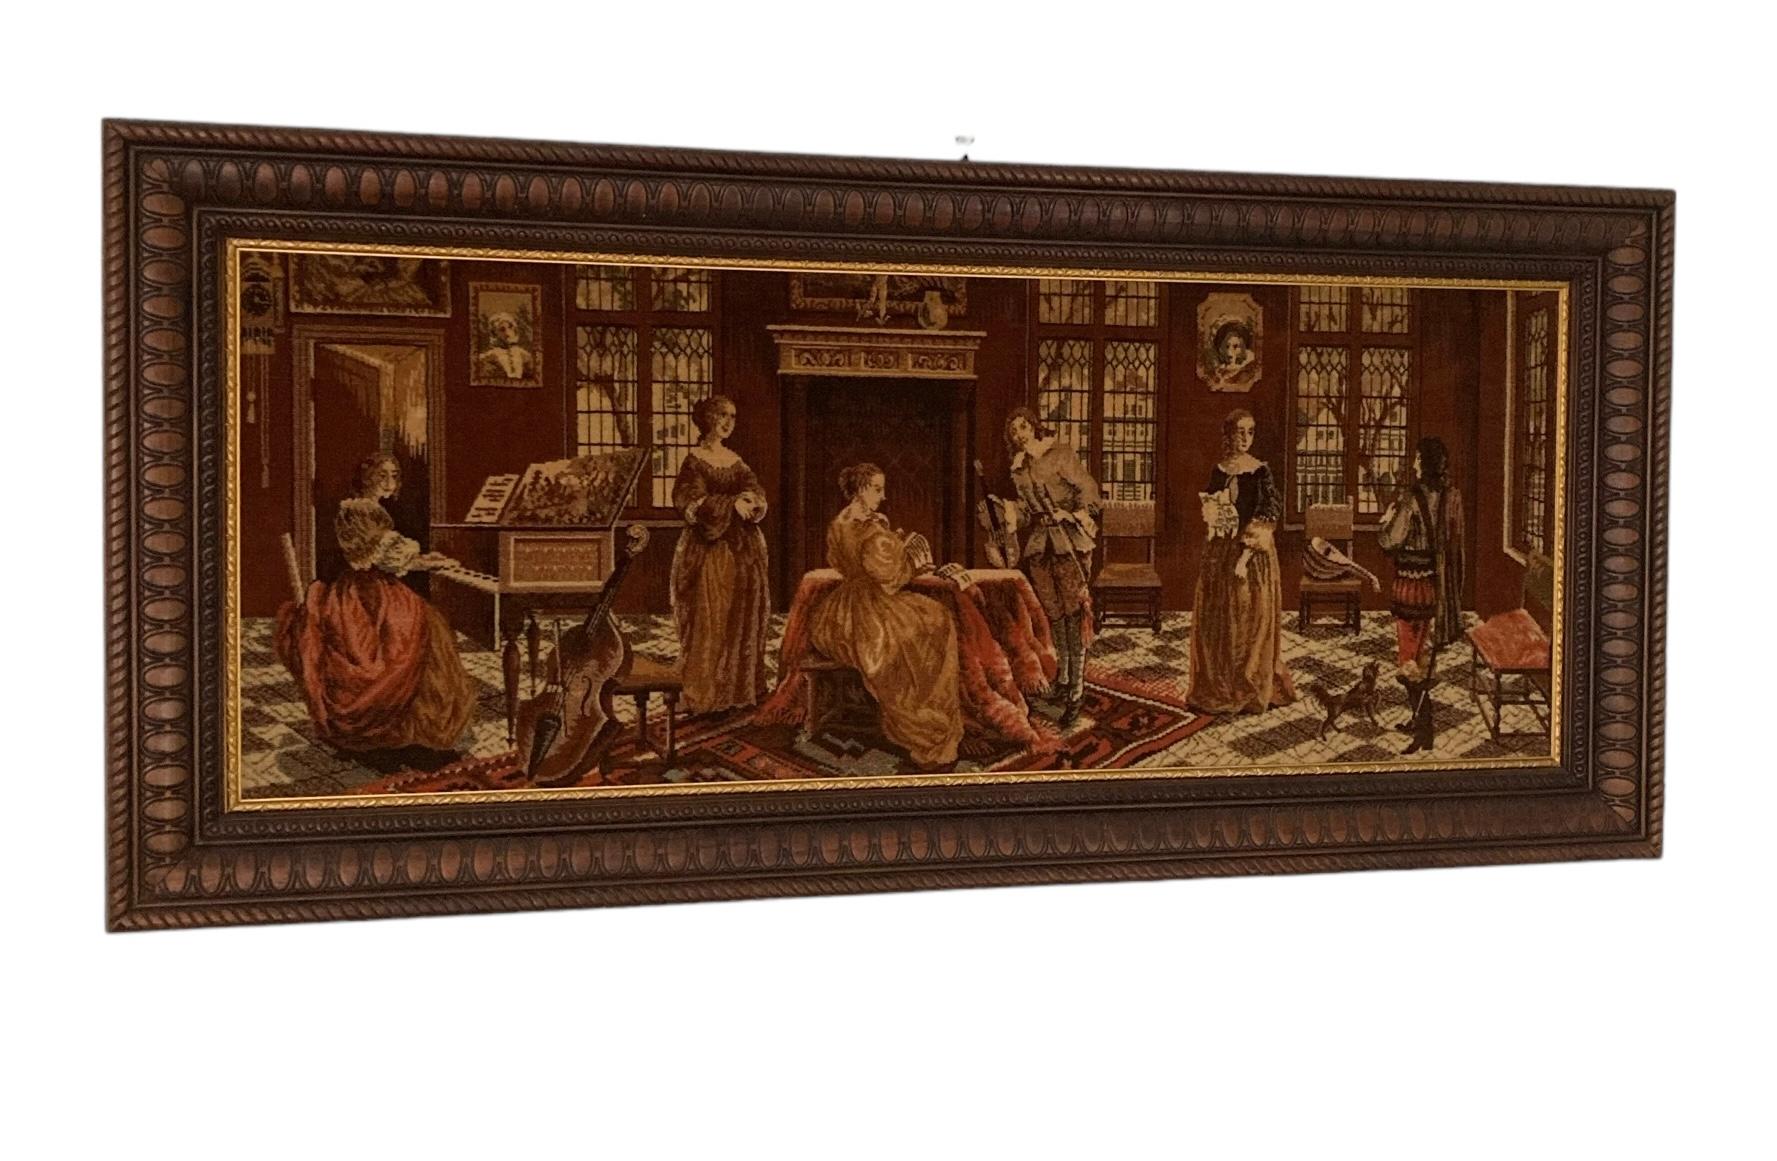 This Beautiful Large Tapestry Style Velvet Picture, depiciting an Elizabethan Courlty Scene. Possibly originating from Belgium this wonderful Piece sits in Large Wooden Dark Oak Frame with a gilded inner border. This picture has enourmous character